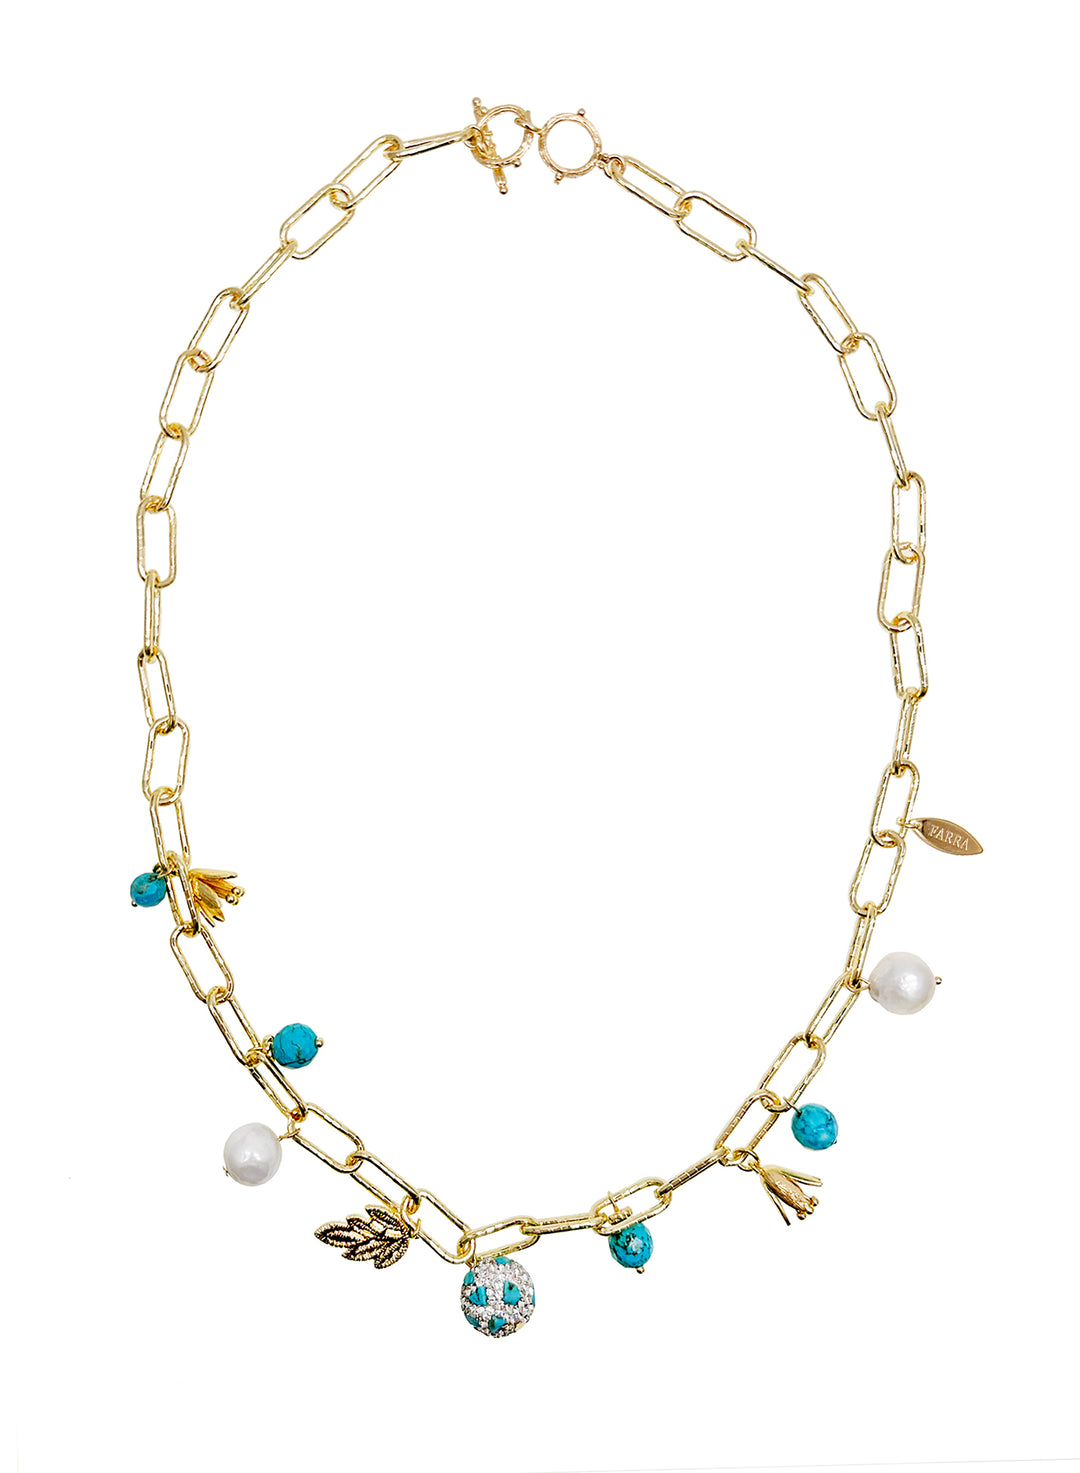 Gold Chain with Turquoise and Pearls Necklace JN053 - FARRA